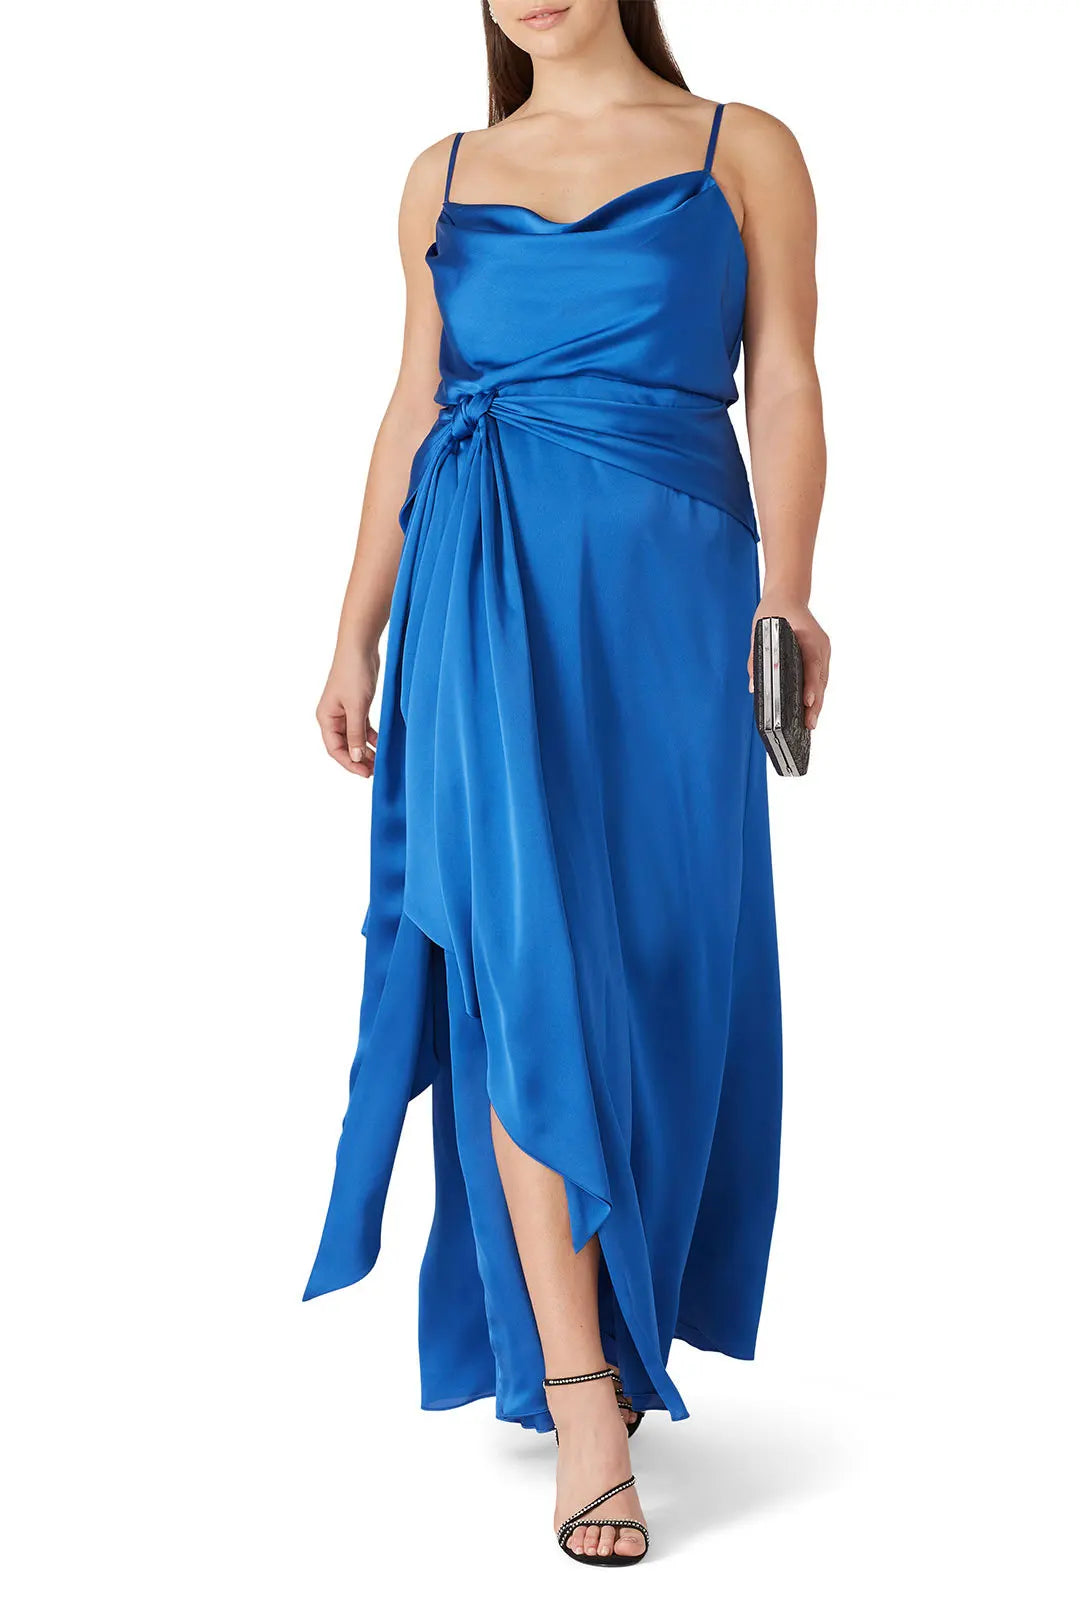 BLUE SATIN TIE KNOT GOWN